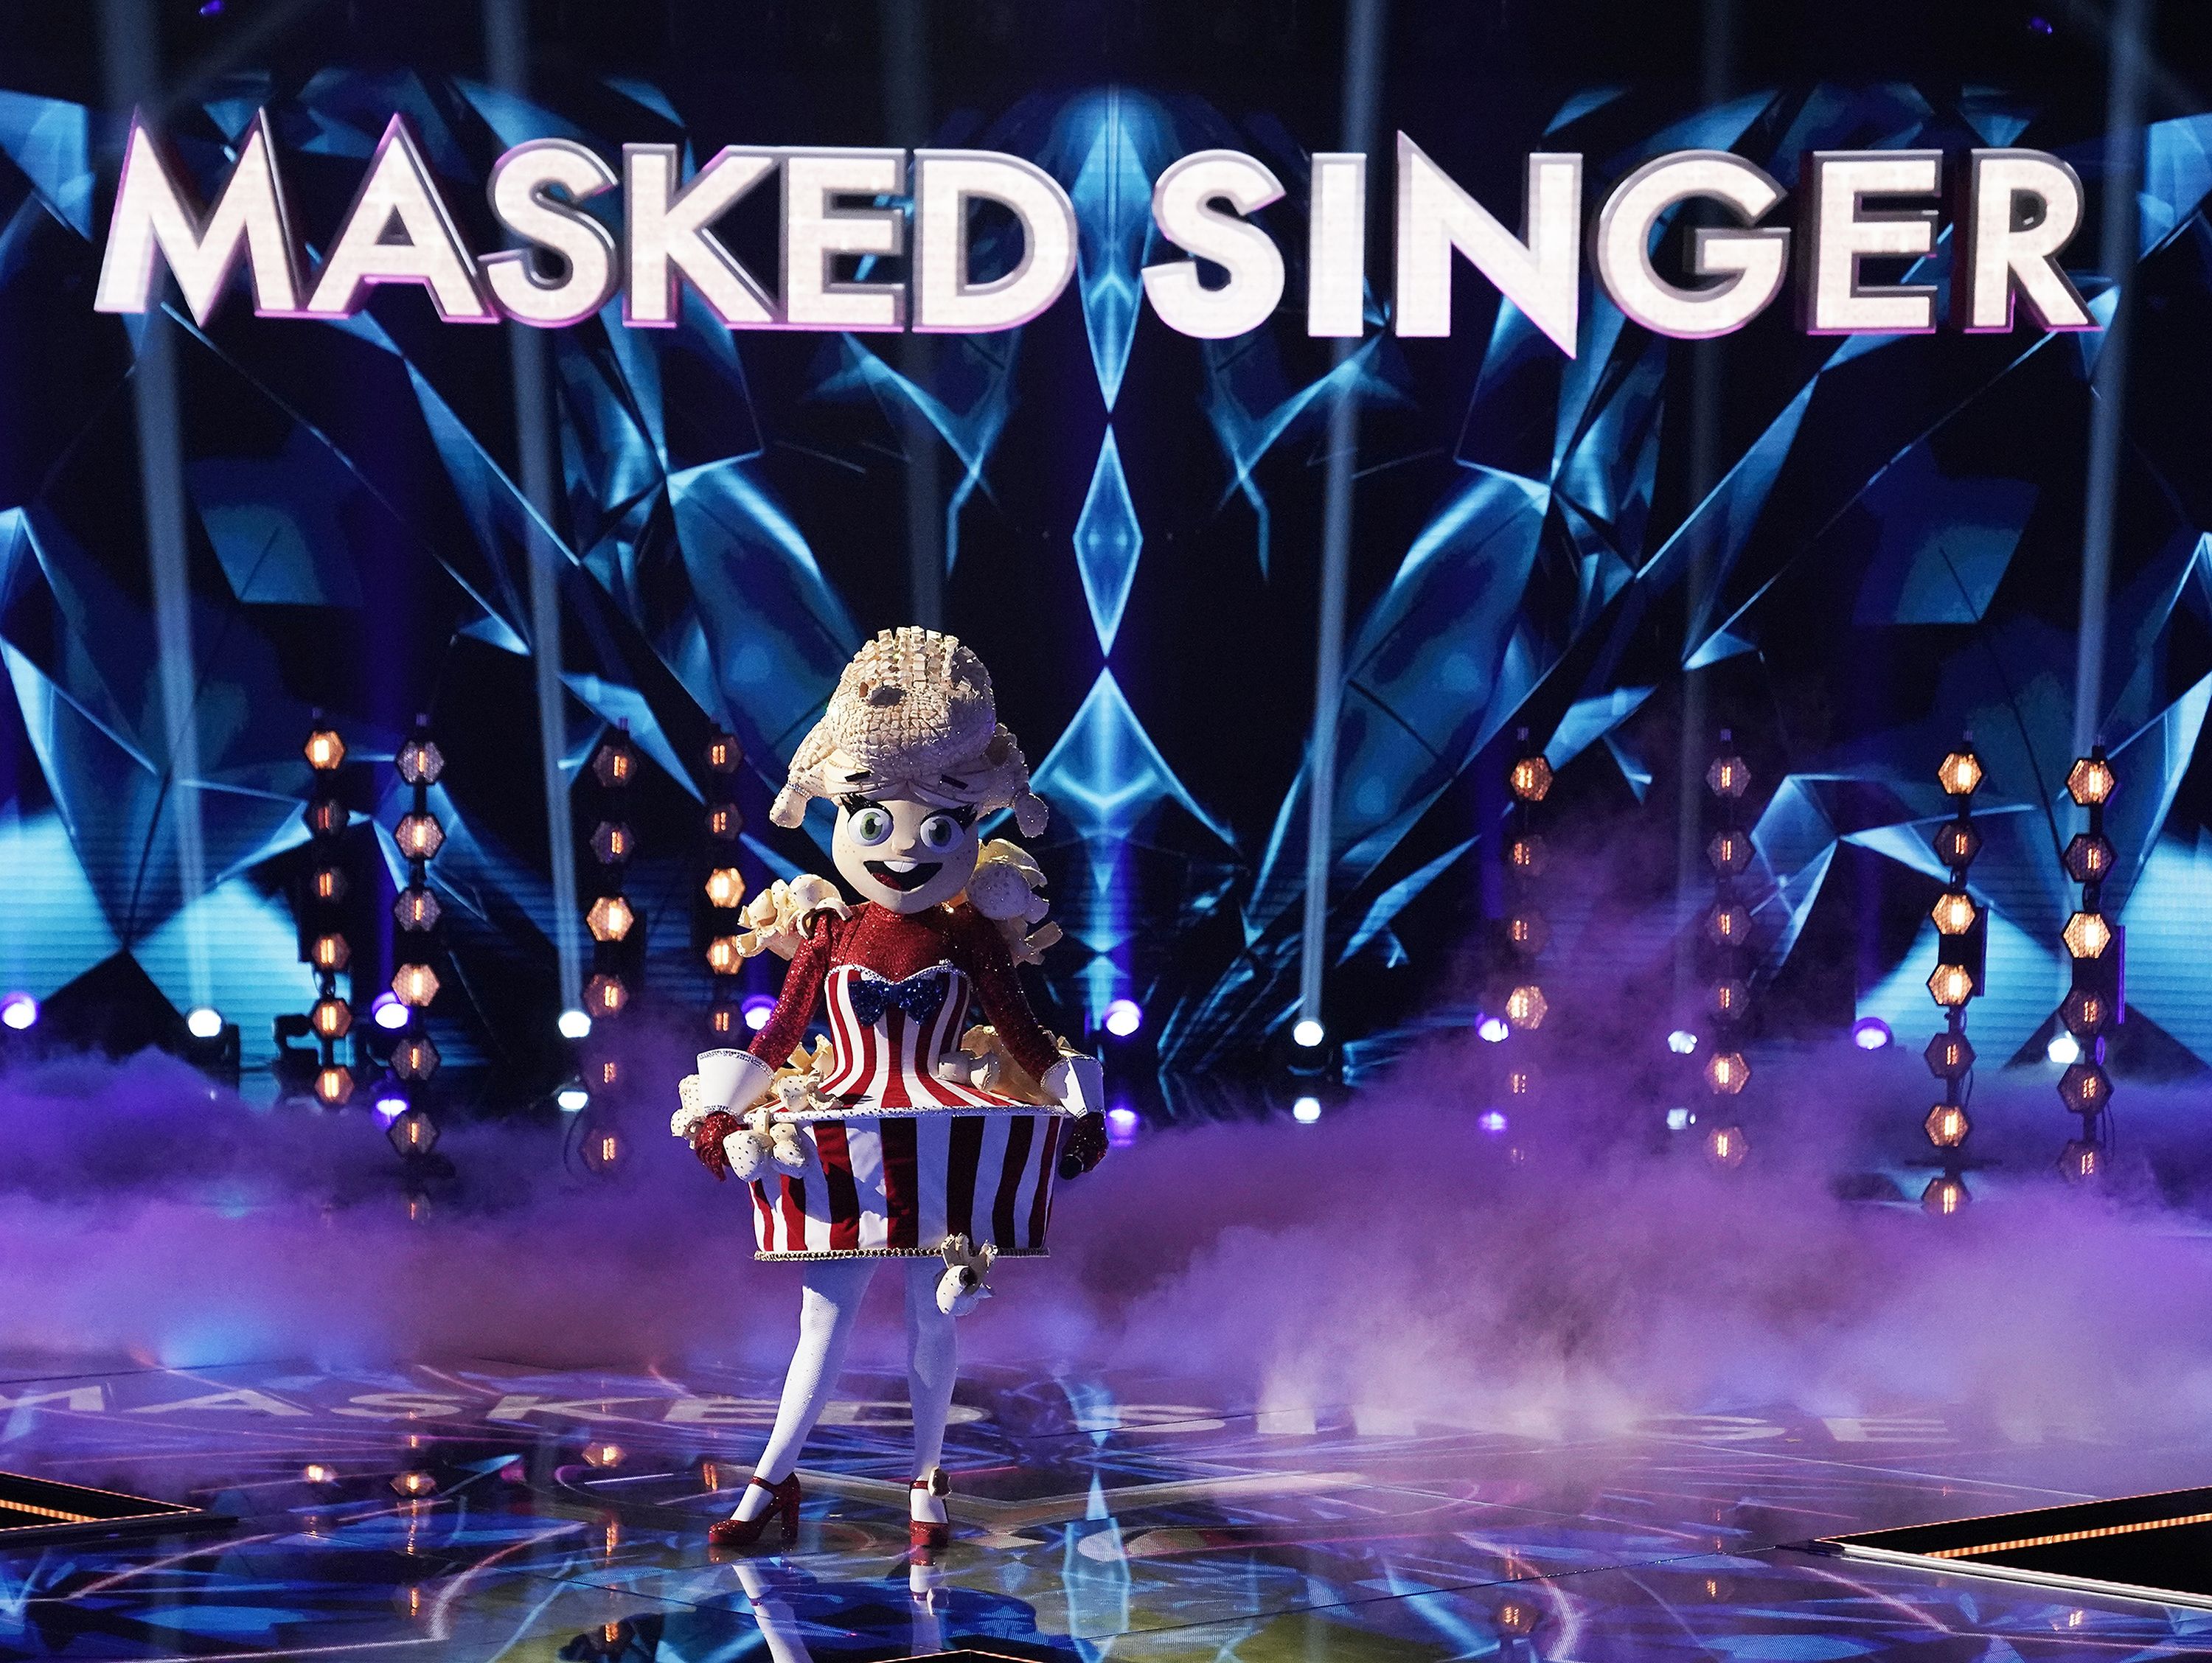 Popcorn in the The Group A Play Offs  on an episode "The Masked Singer" on August 21, 2020 | Photo: Getty Images